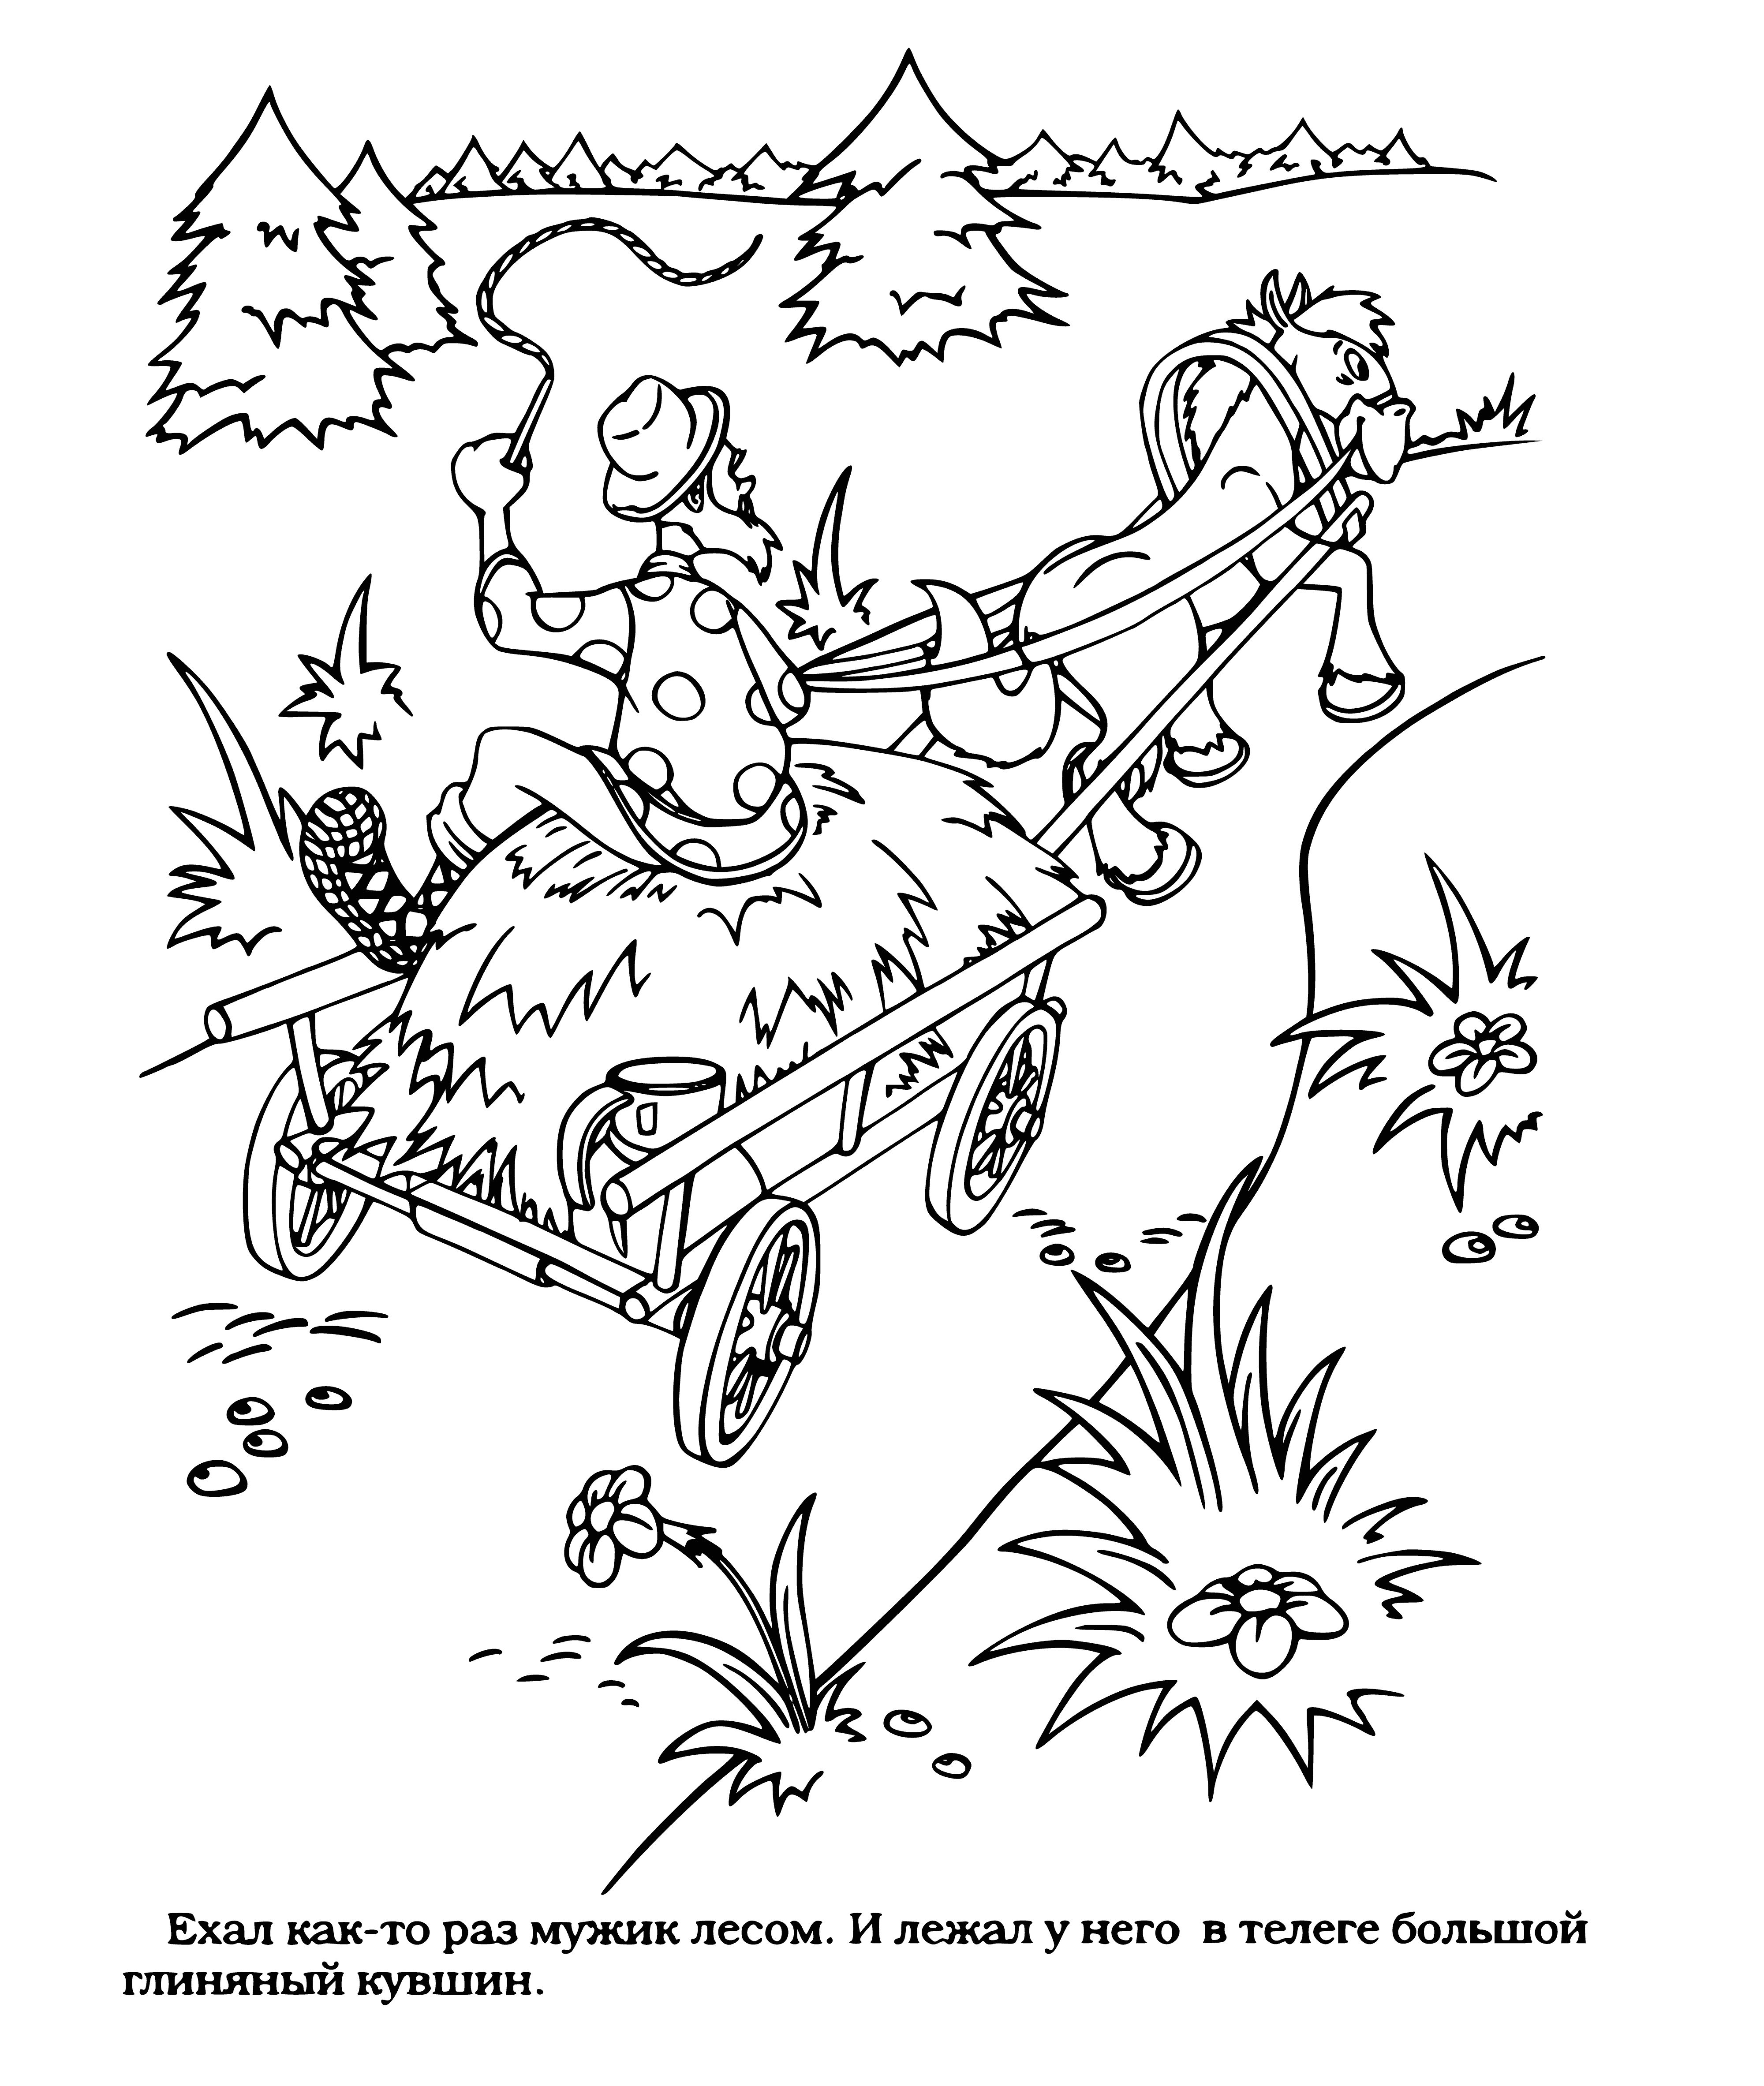 coloring page: A man rides a horse through a field wearing a blue shirt, red scarf, and black hat with a sack over his shoulder. #ridethroughthefield